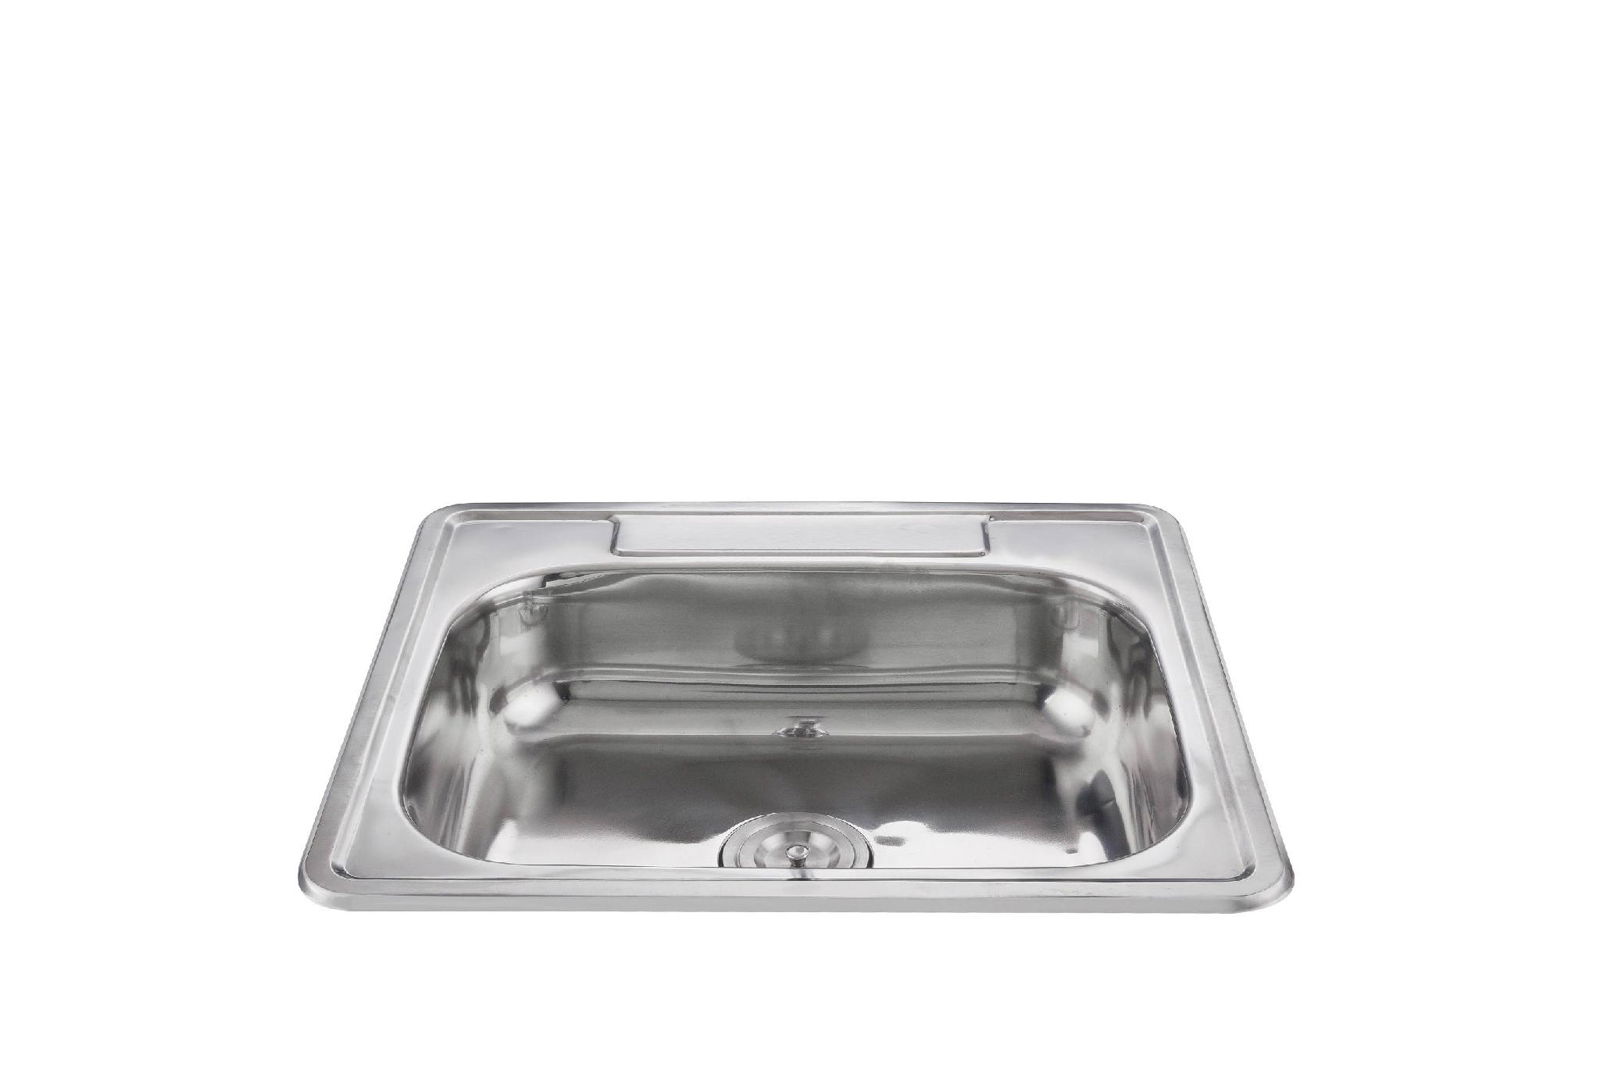 Large size widely used rectangular kitchen sink WY2522